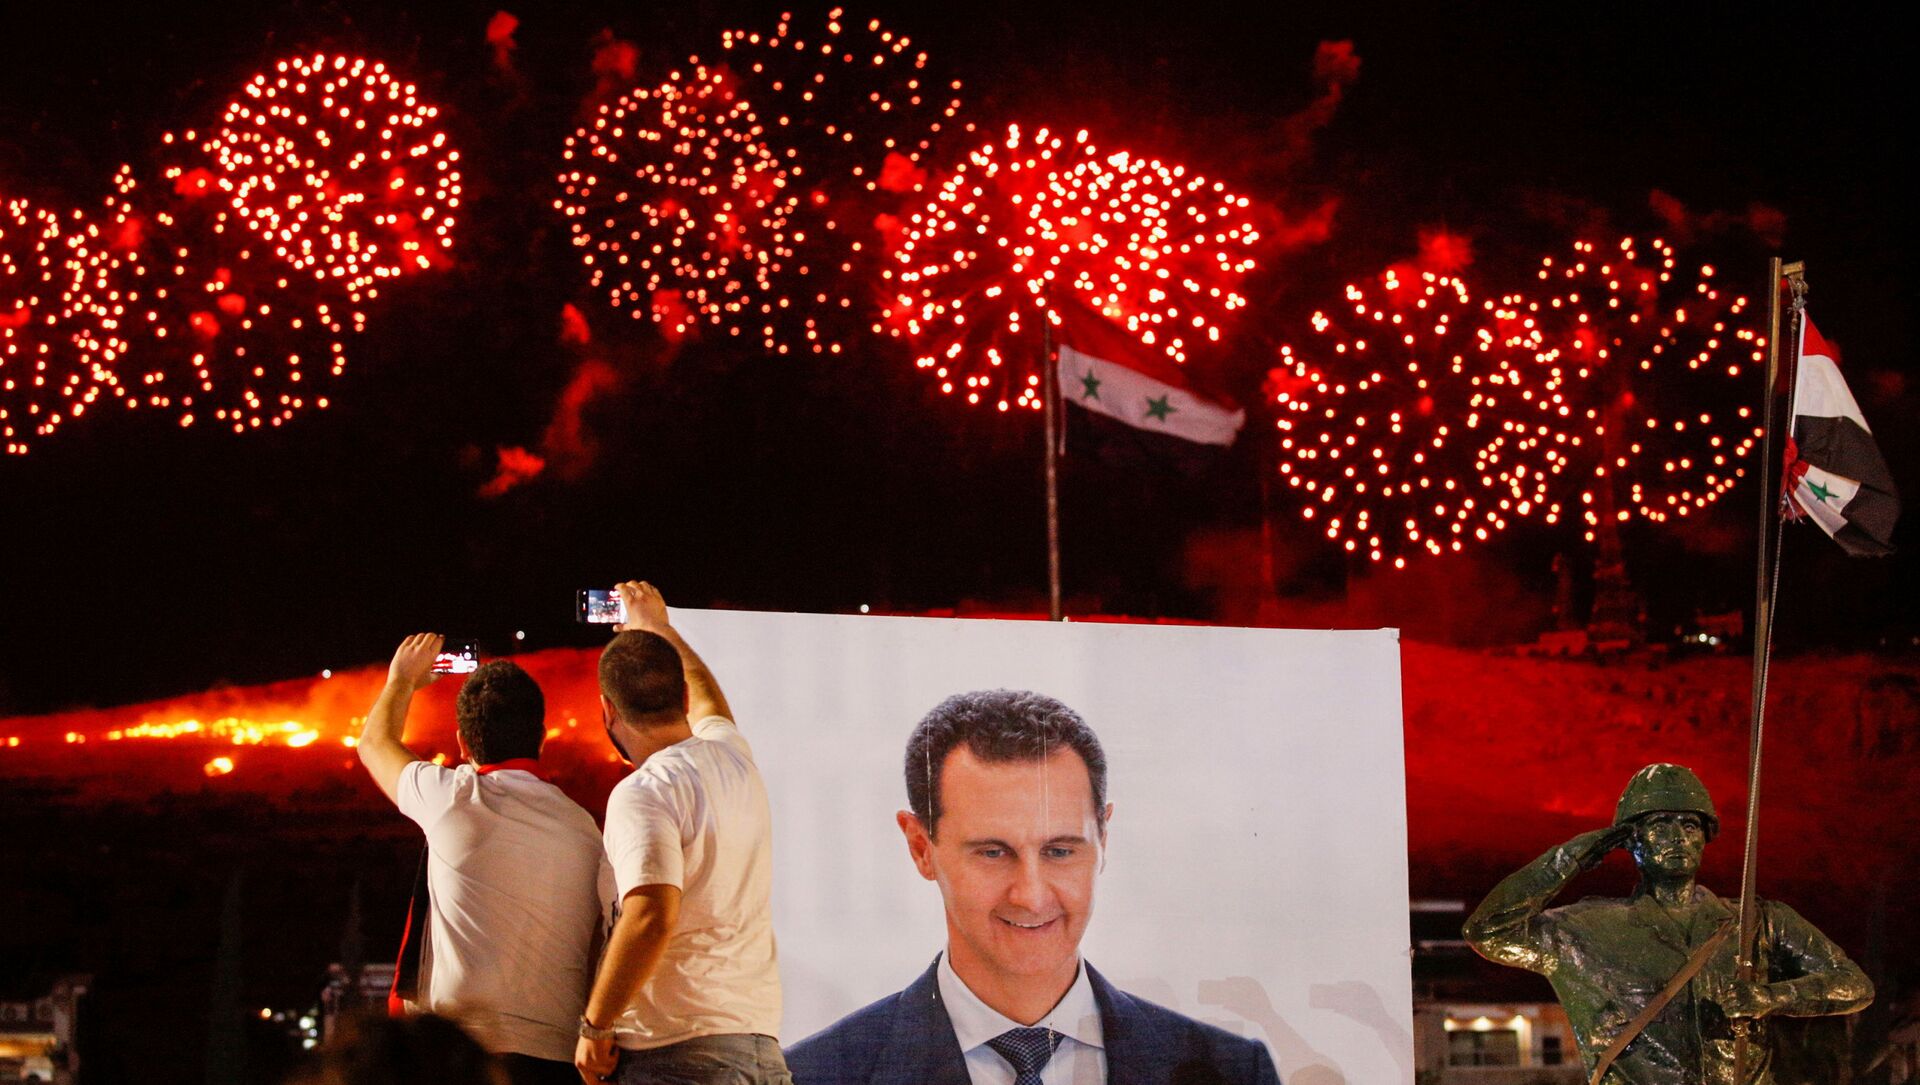 A poster depicting Syria’s president Bashar al- Assad is seen as supporters of of Syria's President Bashar al-Assad celebrate after the results of the presidential election announced that he won a fourth term in office, in Damascus, Syria, May 27, 2021. - Sputnik International, 1920, 27.05.2021